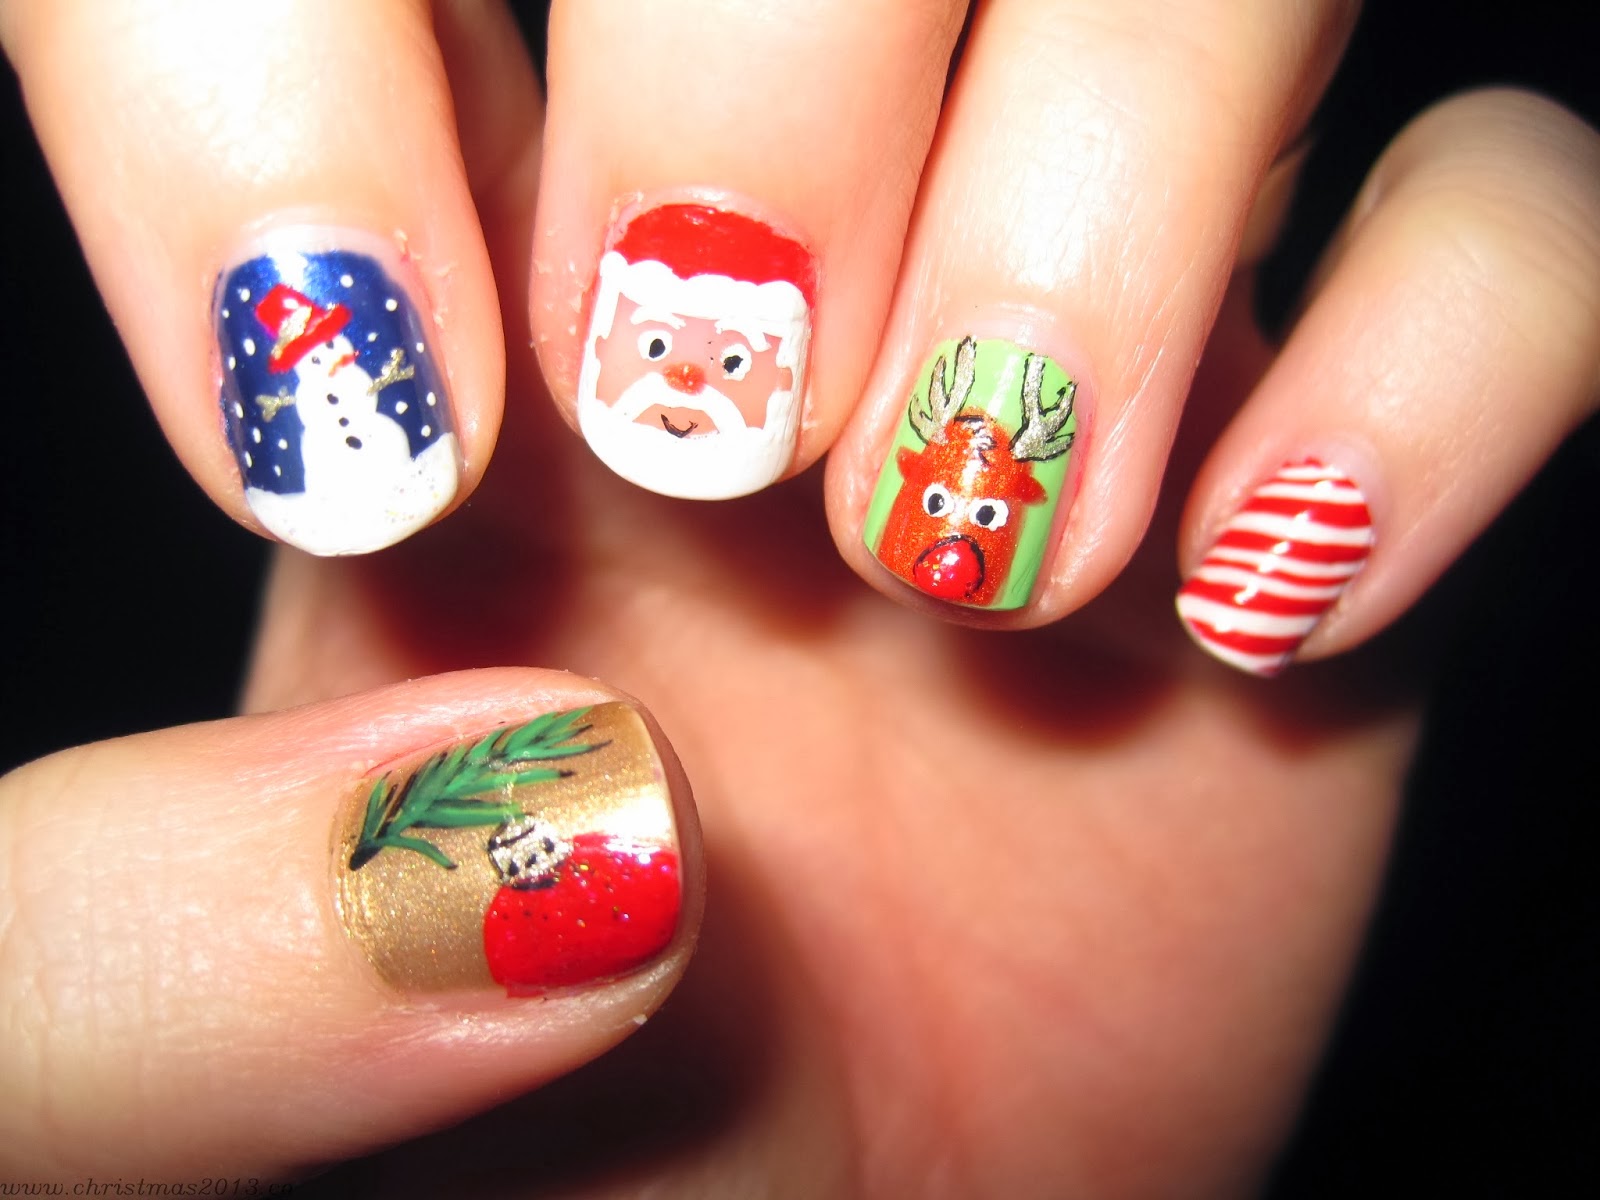 1. "Festive Christmas Nail Art Ideas for a Cool Holiday Look" - wide 6